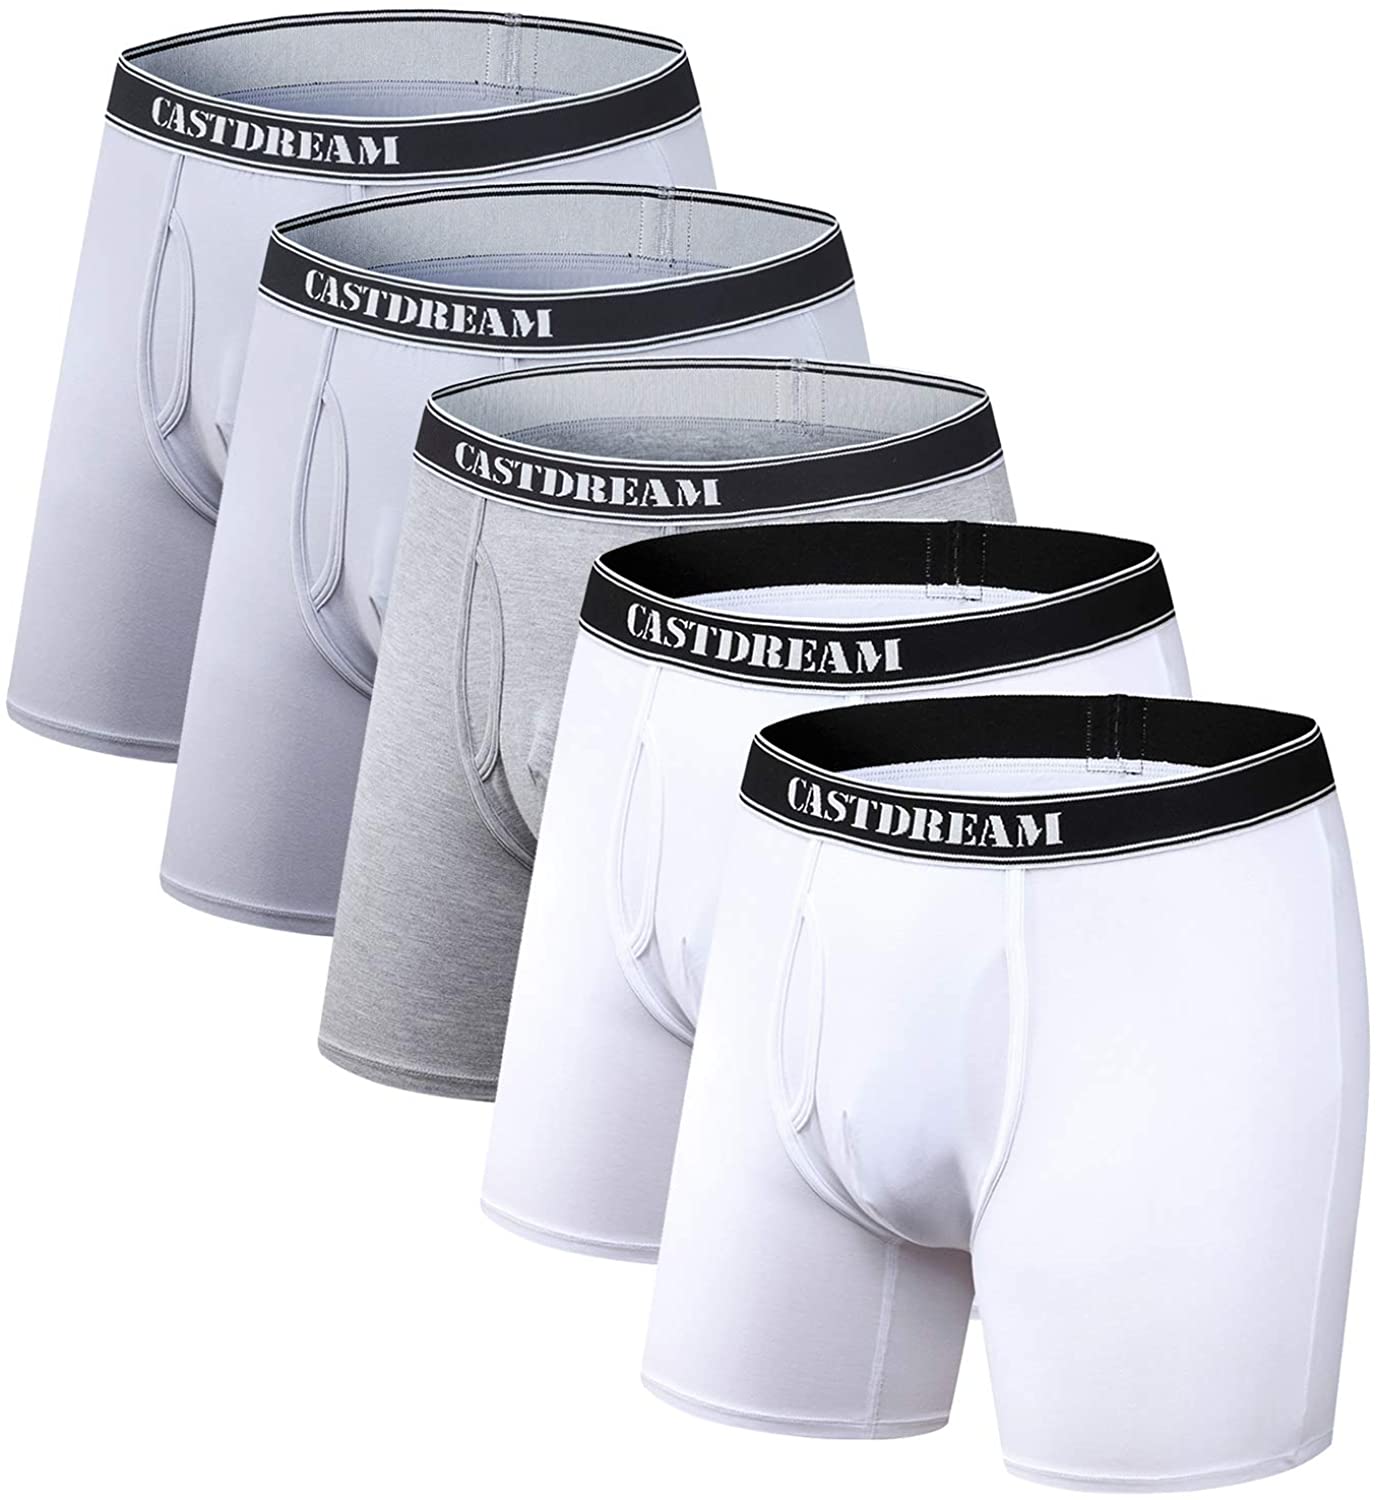 4Packs Patrick Silver Men's Breathable Bamboo Rayon Boxer Underwear with Fly